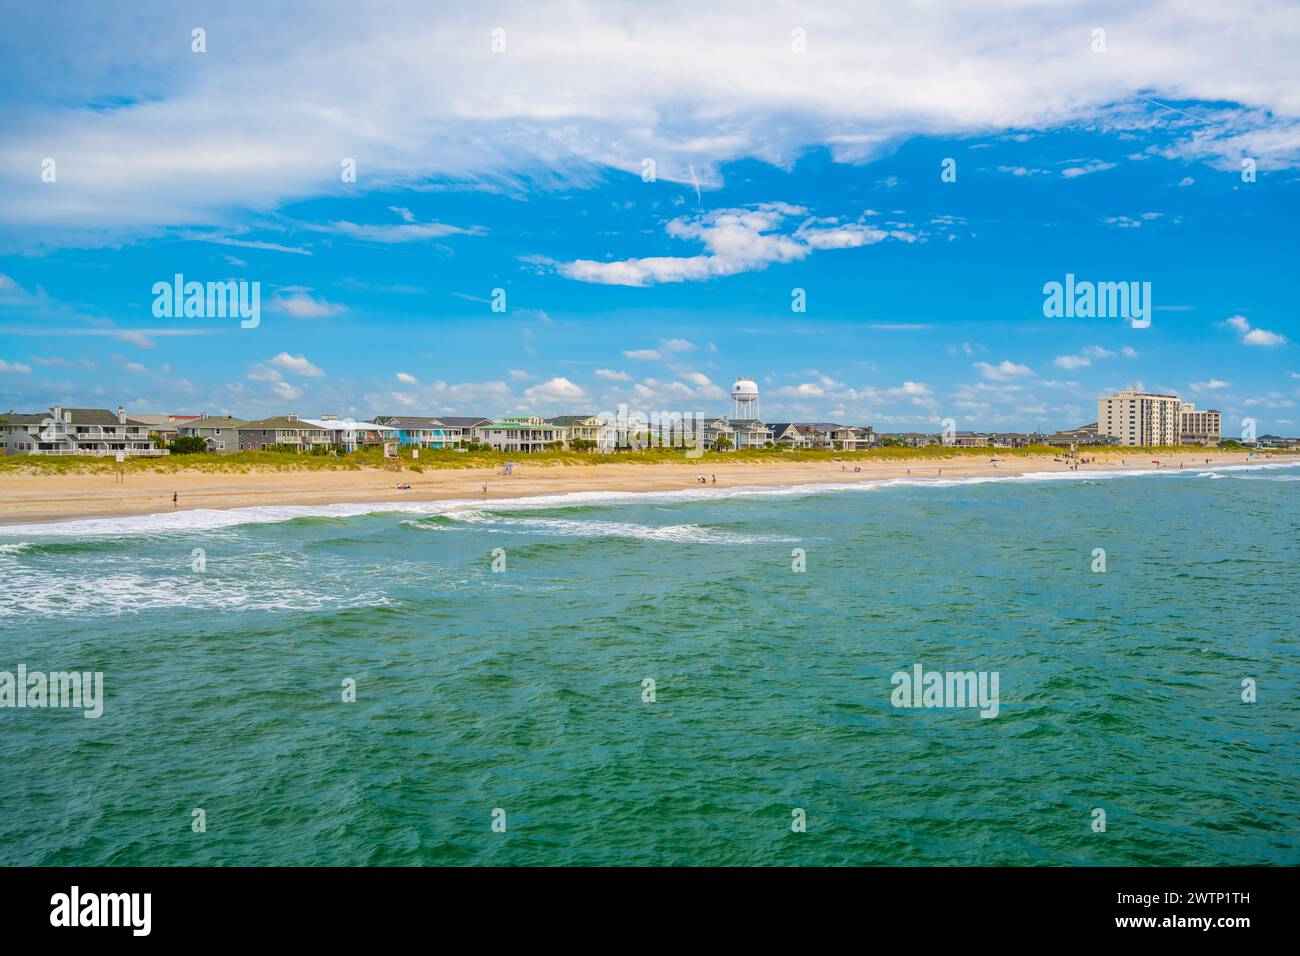 An overlooking view in North Carolina, Wilmington Beach Stock Photo